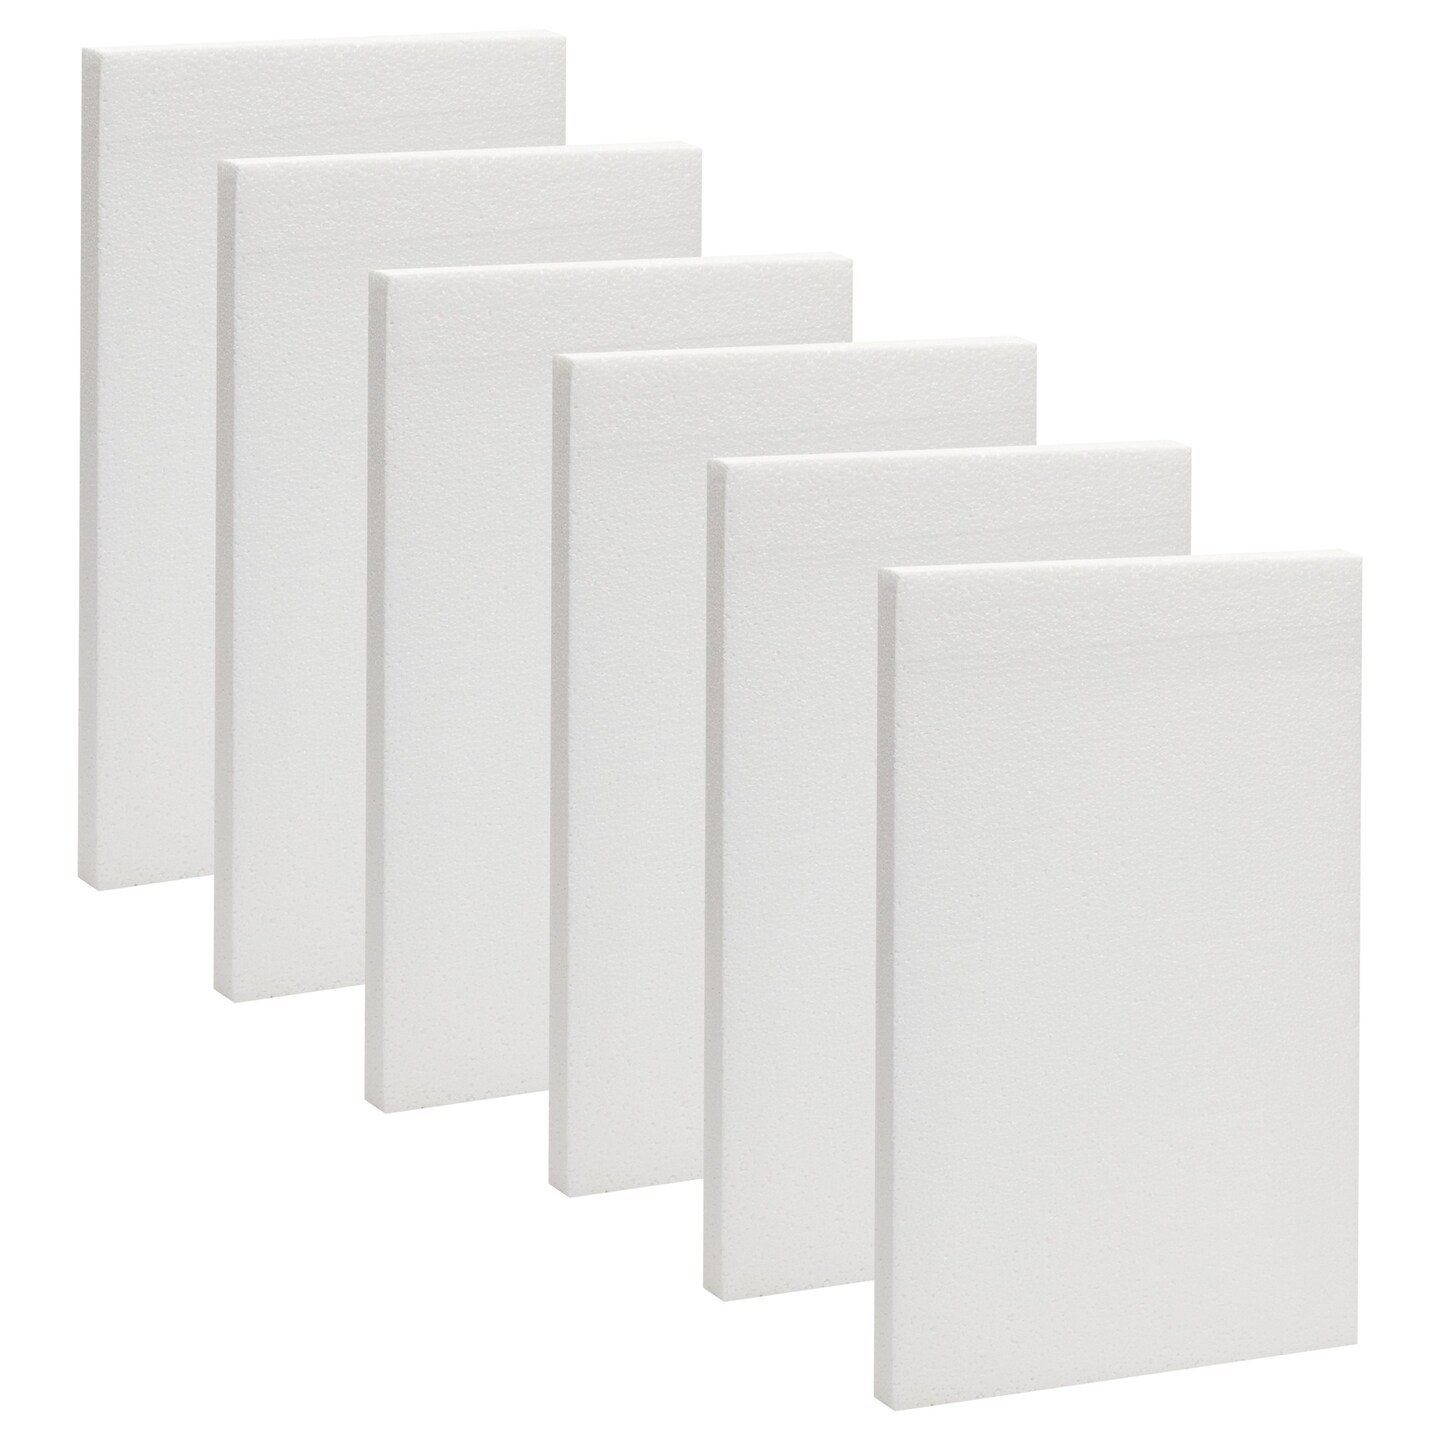 1 Inch Thick Foam Board Sheets - 6 Pack 17x11 Inch Polystyrene Rectangles  for DIY Crafts, Insulation, Sculptures, Models (White)